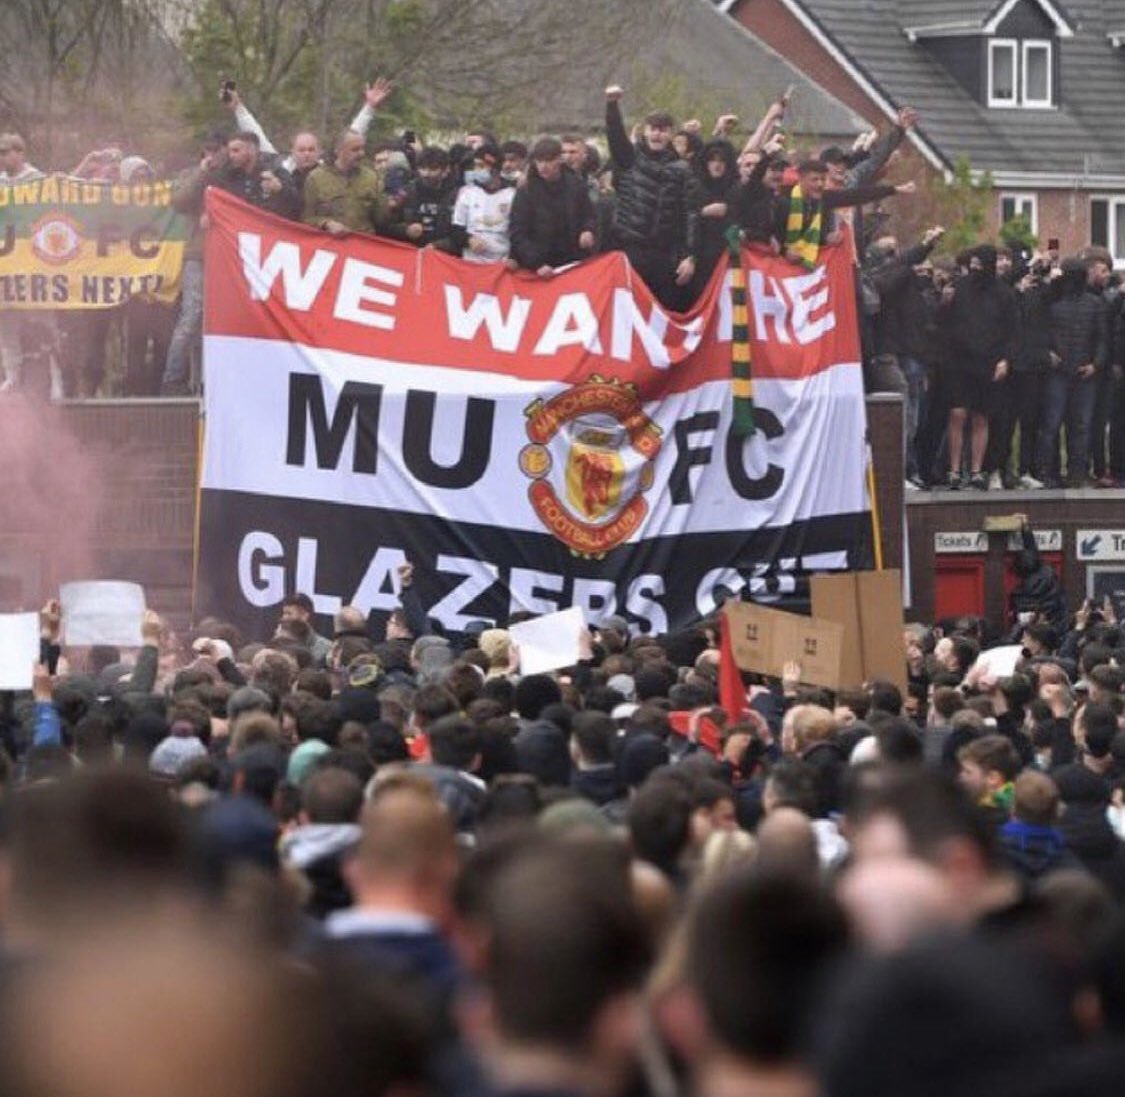 Don’t scroll past without giving a like and a retweet, we need to be trending. #GlazersOut 🔰